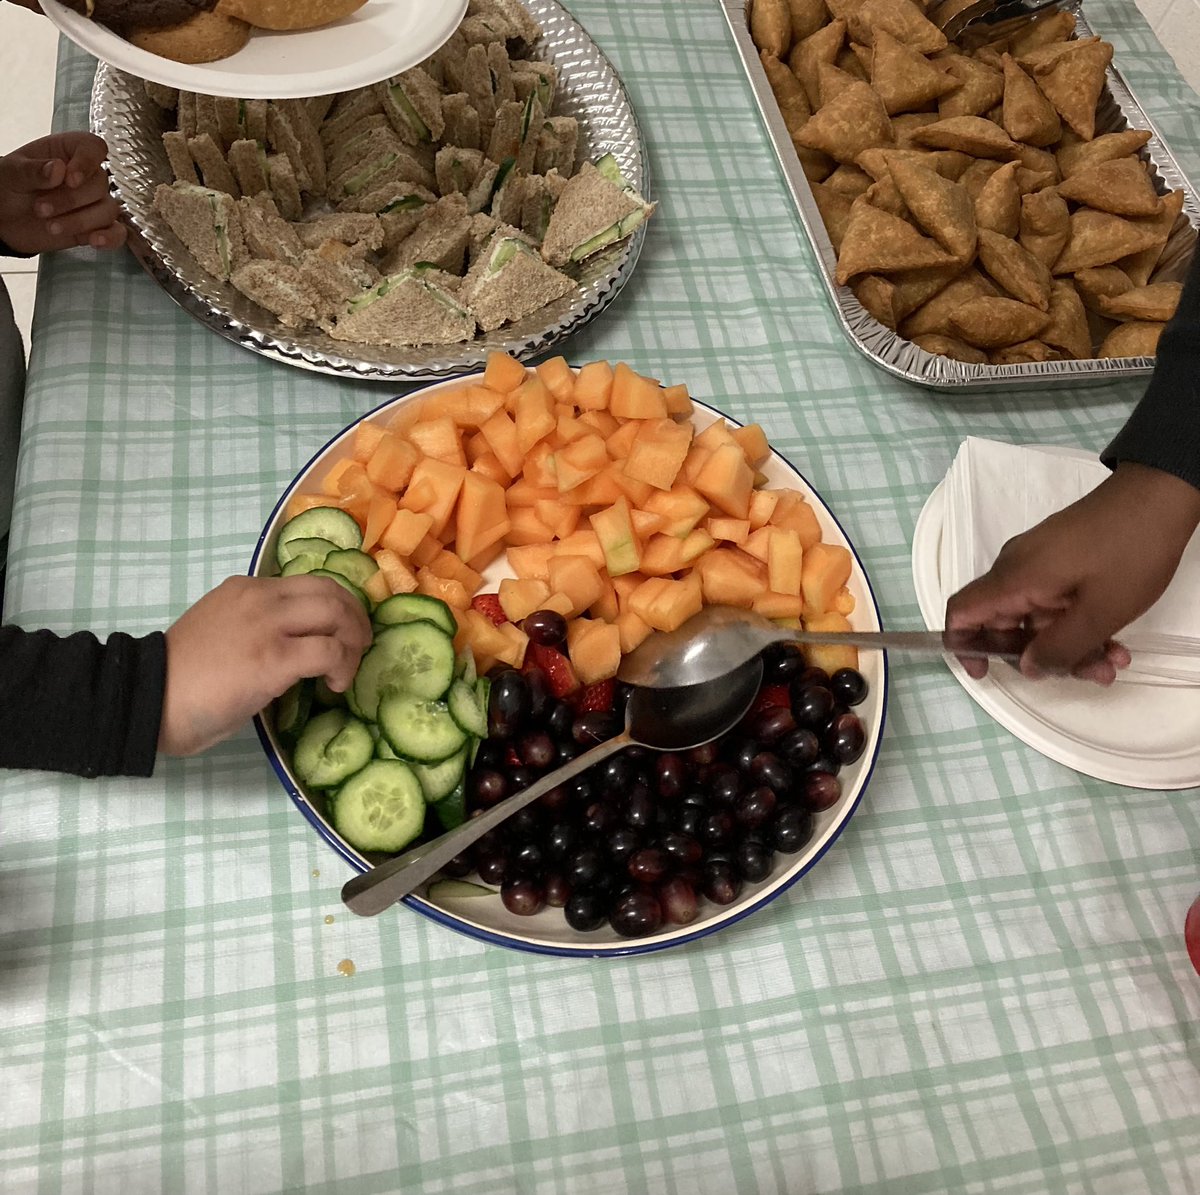 Learning about healthy eating during our last Grandparents Club event with @regionofpeel Public Health Nurse Purba. The kids were quite proud of the sandwiches they made!